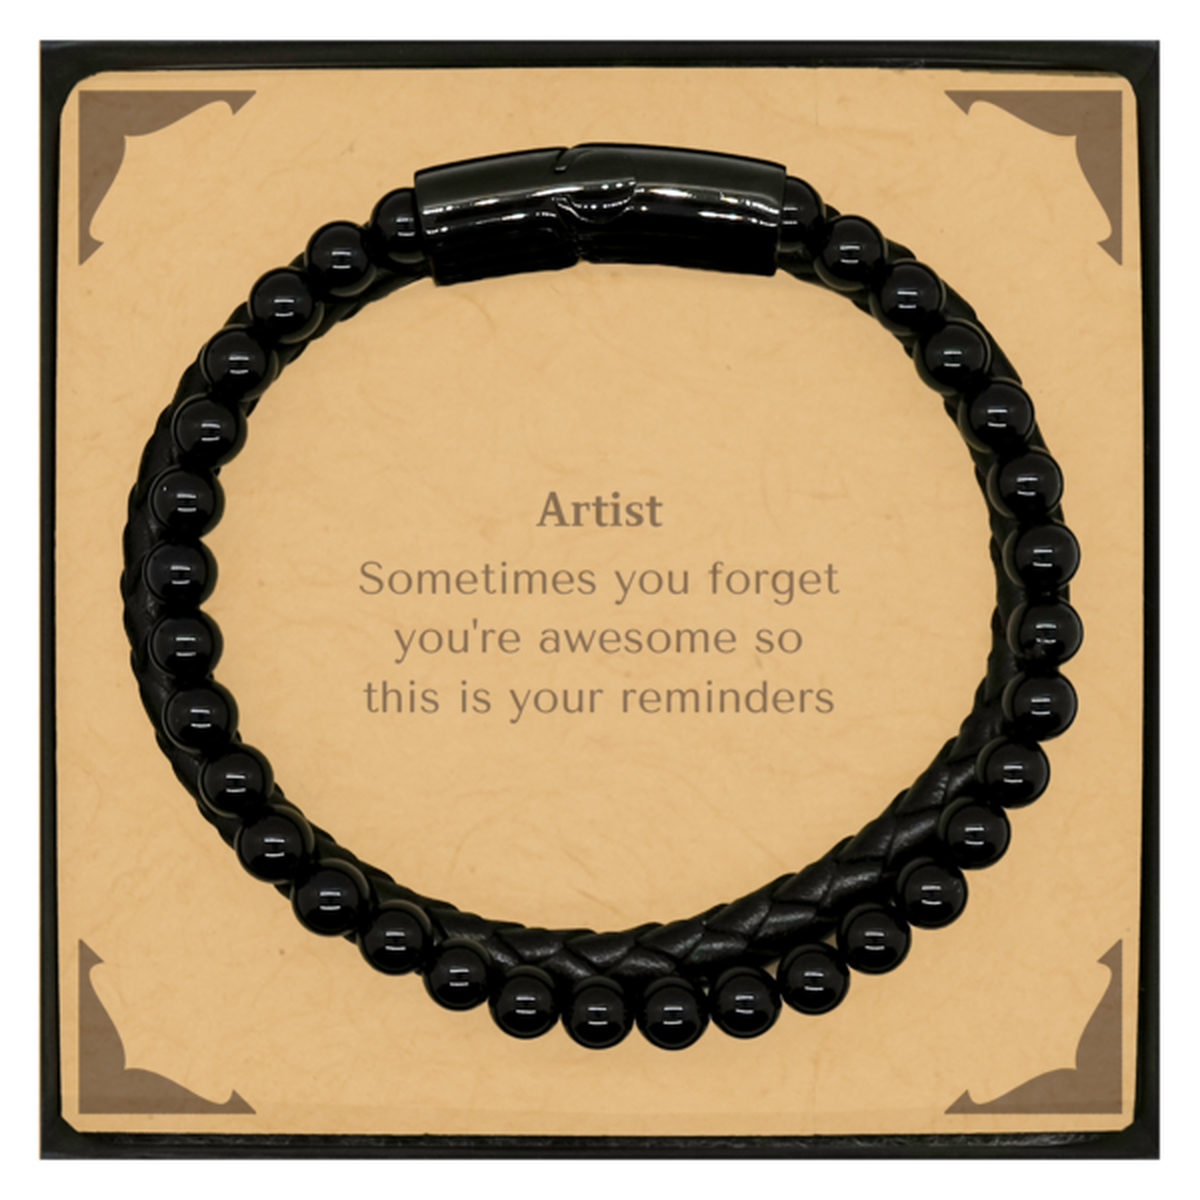 Sentimental Artist Stone Leather Bracelets, Artist Sometimes you forget you're awesome so this is your reminders, Graduation Christmas Birthday Gifts for Artist, Men, Women, Coworkers